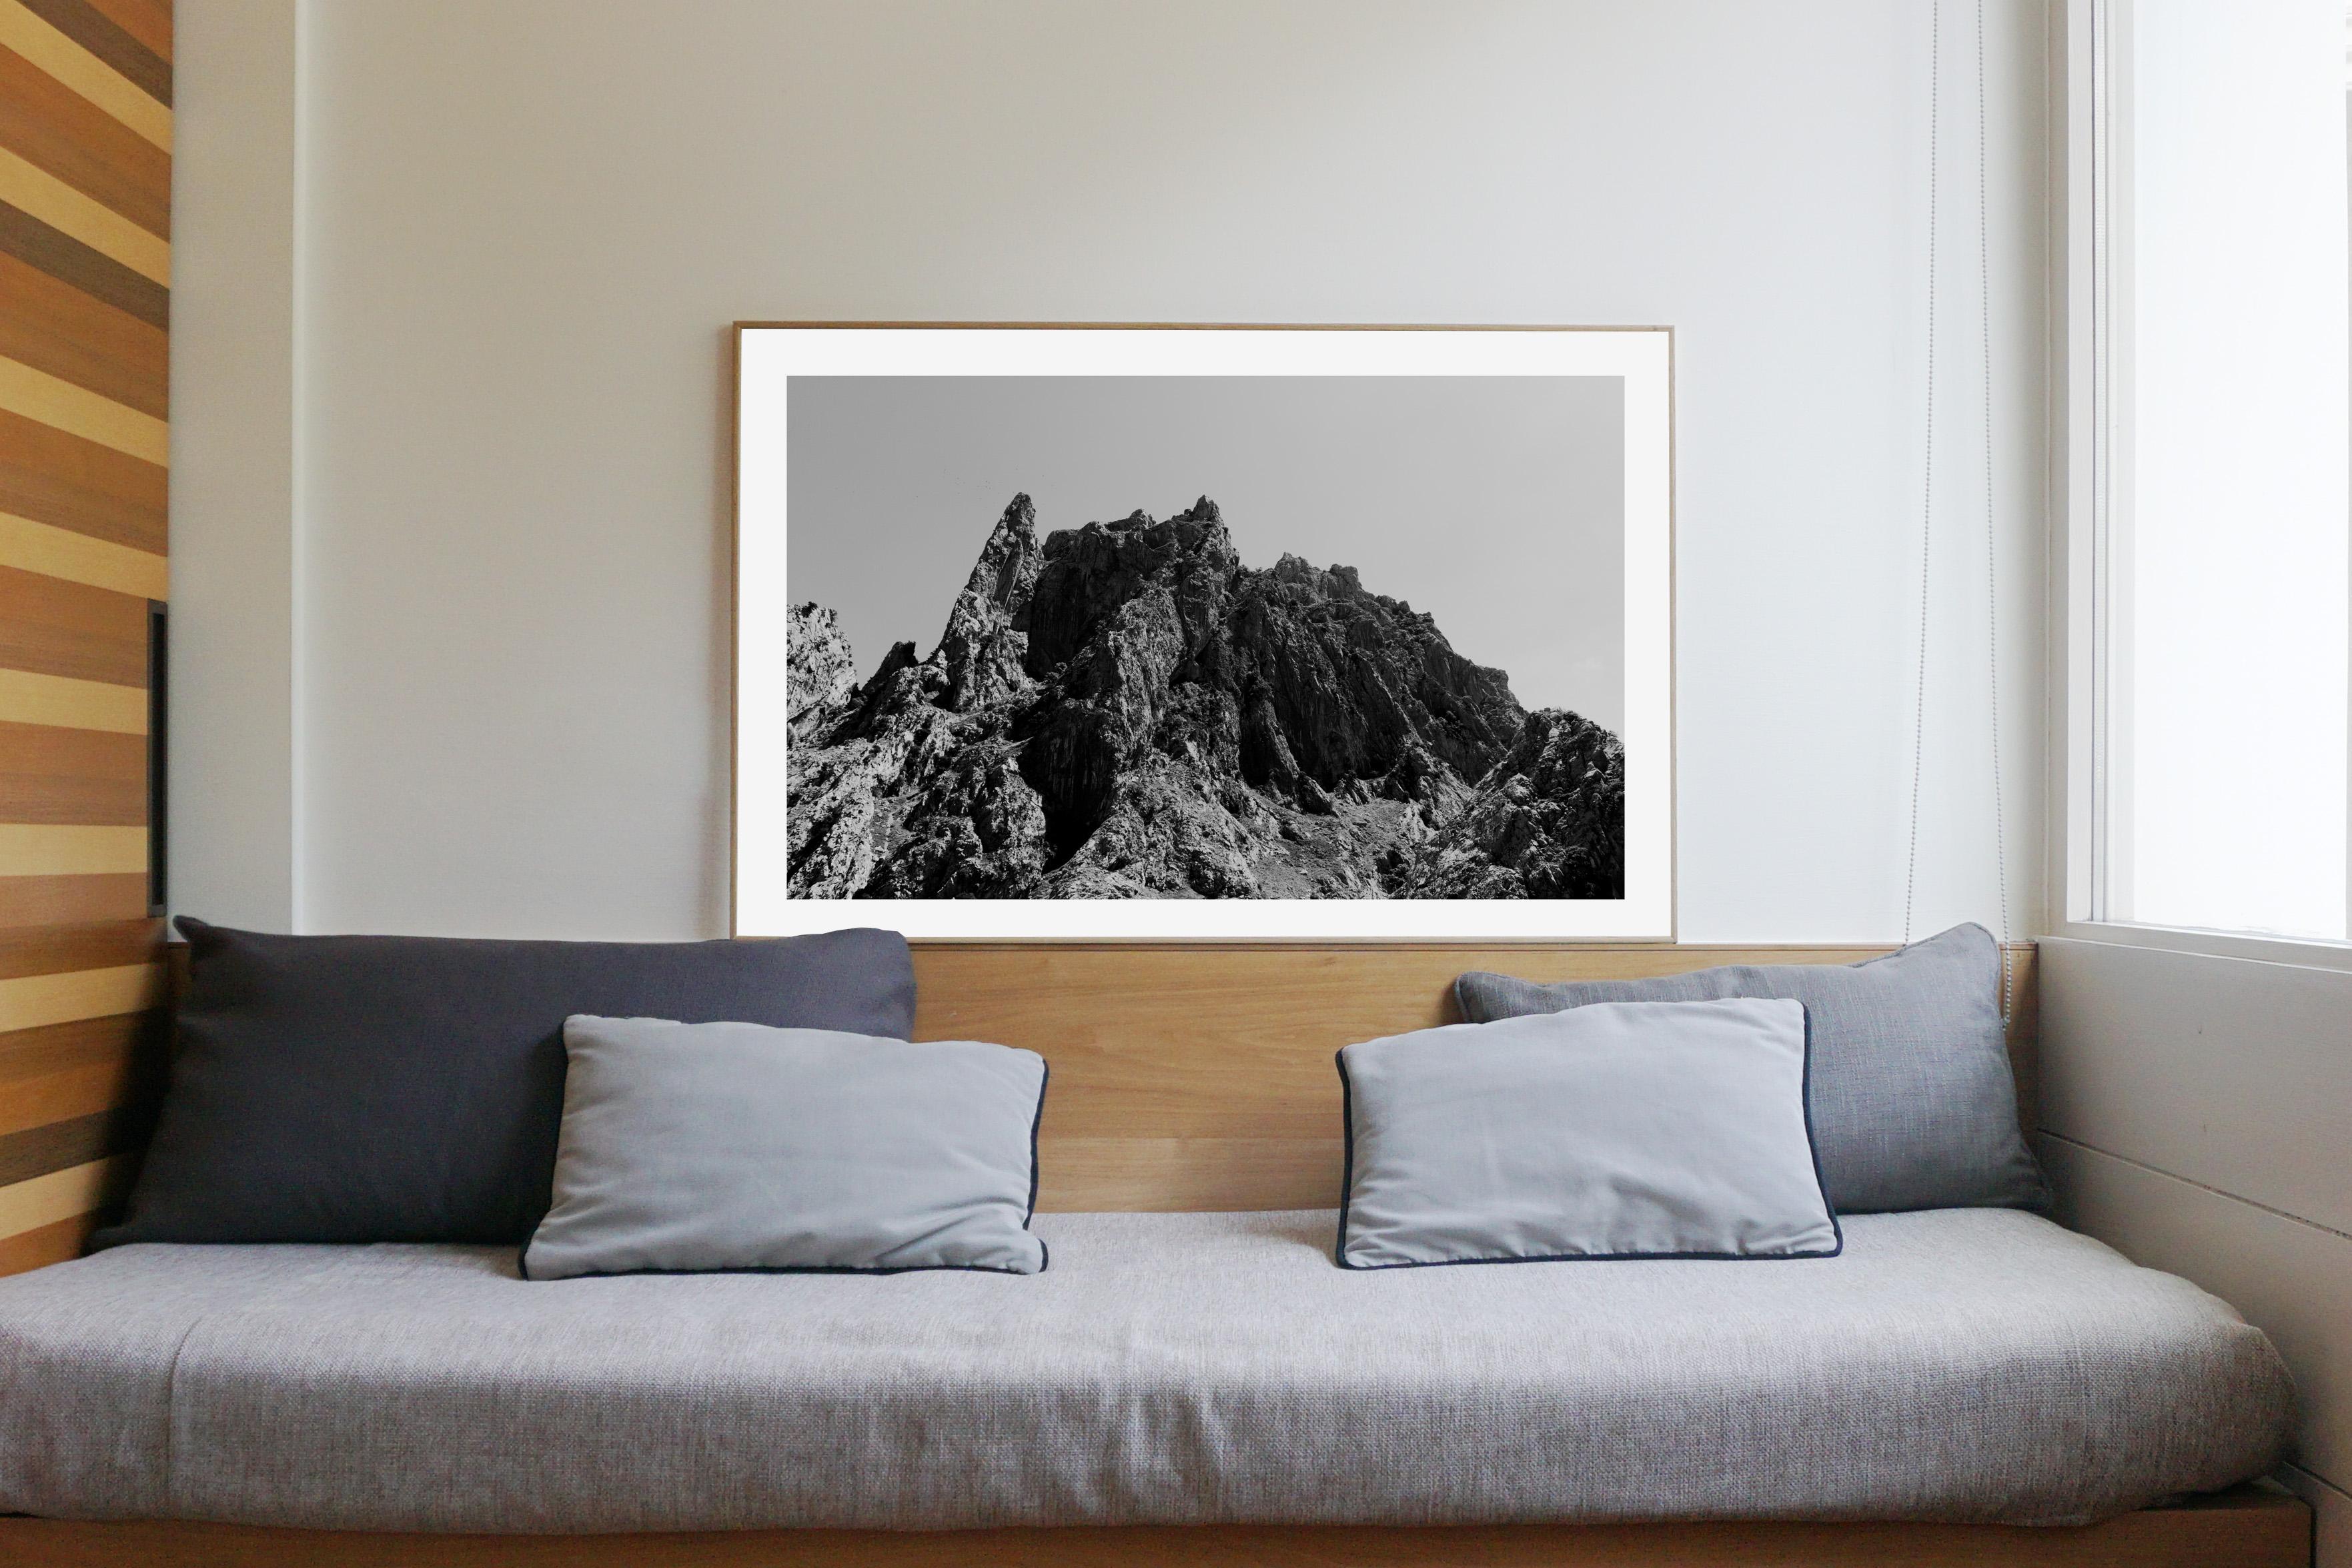 This is an exclusive limited edition black and white giclée print, on 100% cotton Hahnemühle Photo Rag Fine Art matte paper.

This series of black and white photographs captures the intricate and beautiful forms and textures found in the natural